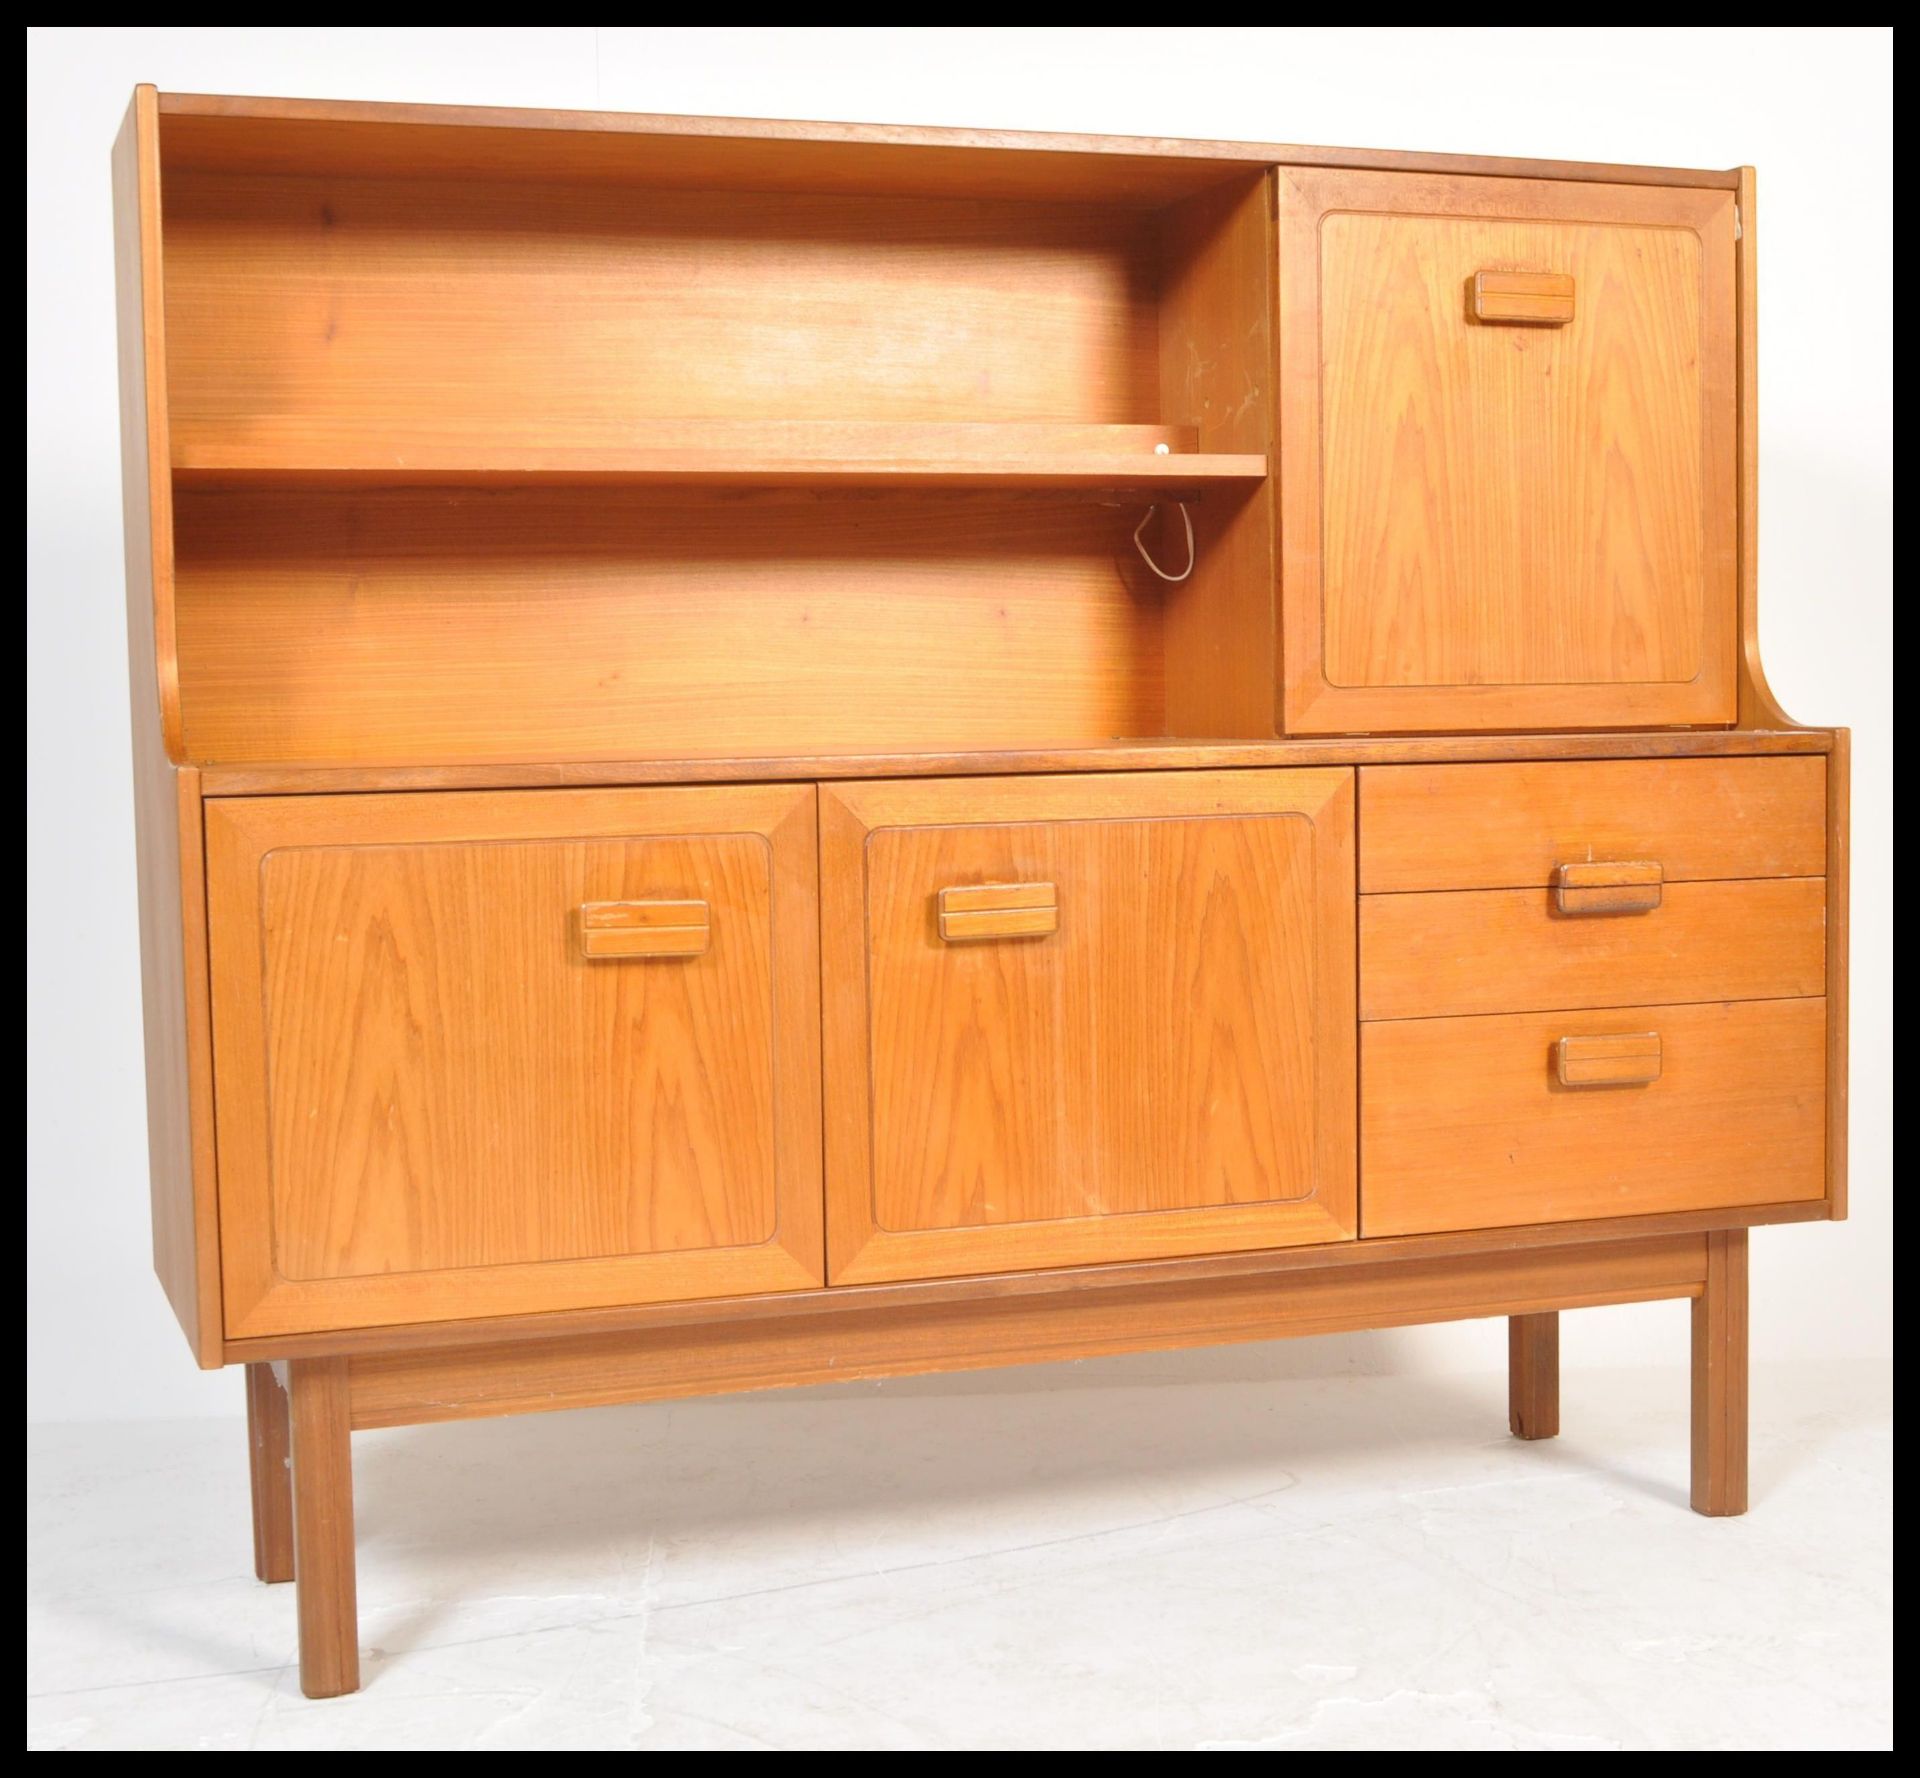 A retro 20th Century teak wood highboard sideboard credenza by Alfred Cox having an arrangement of